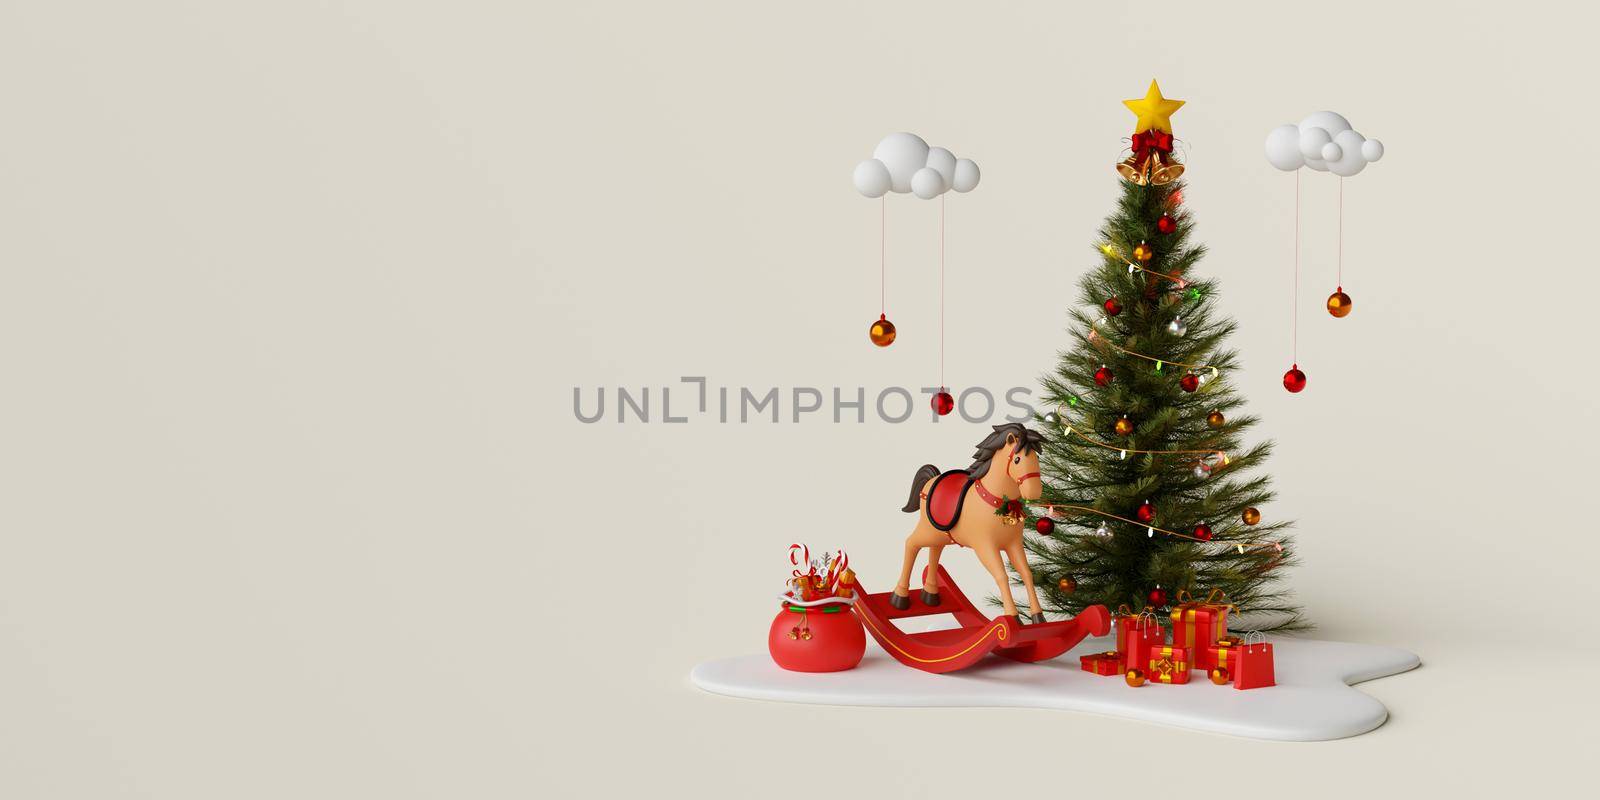 Christmas web banner of rocking horse, Christmas tree and gift box, 3d illustration